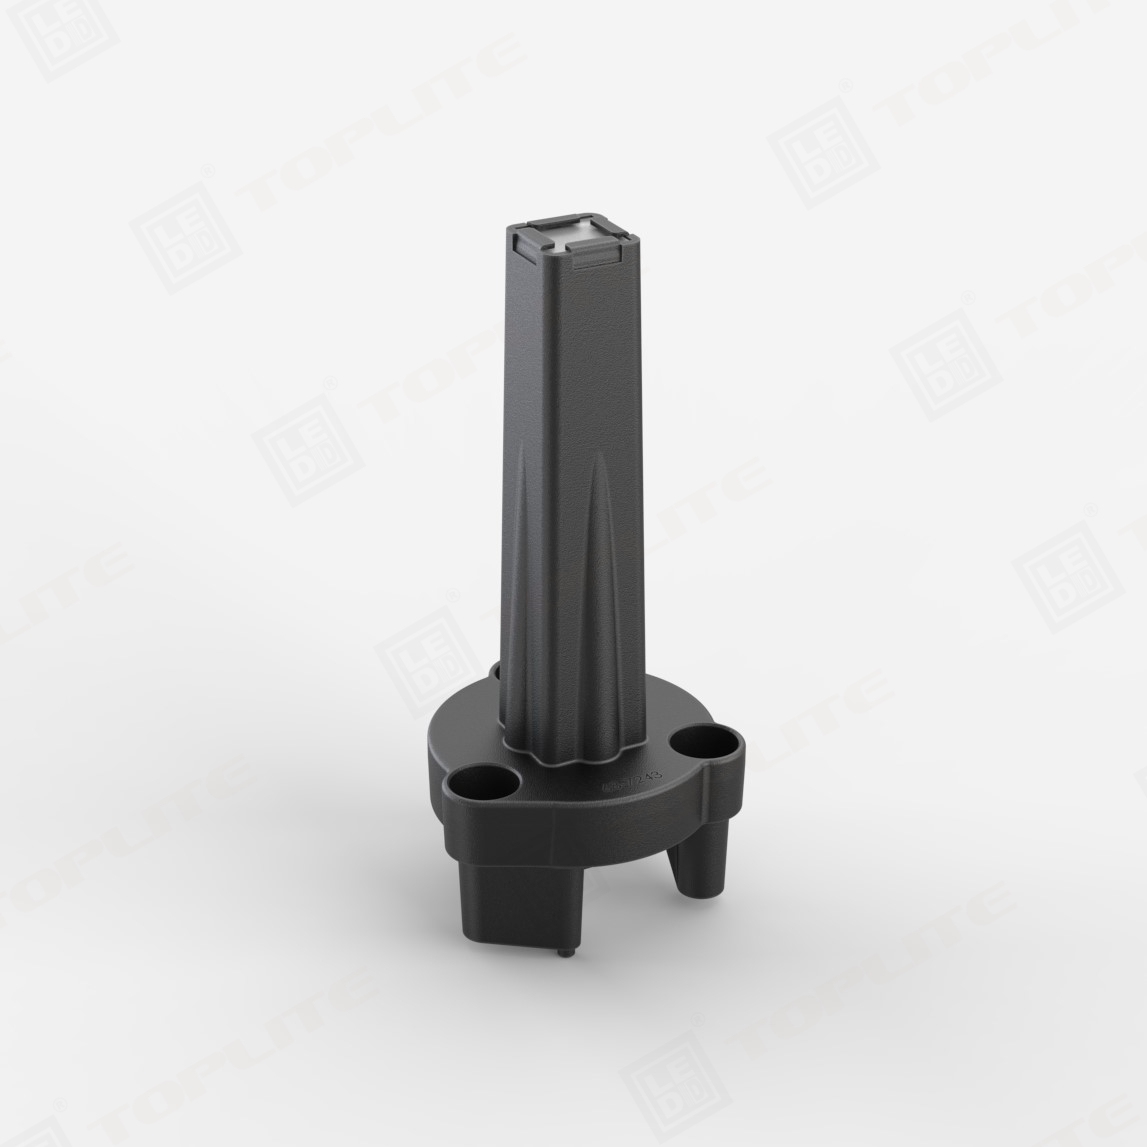 Product Introduction: TOP-68-7243 Light Guide